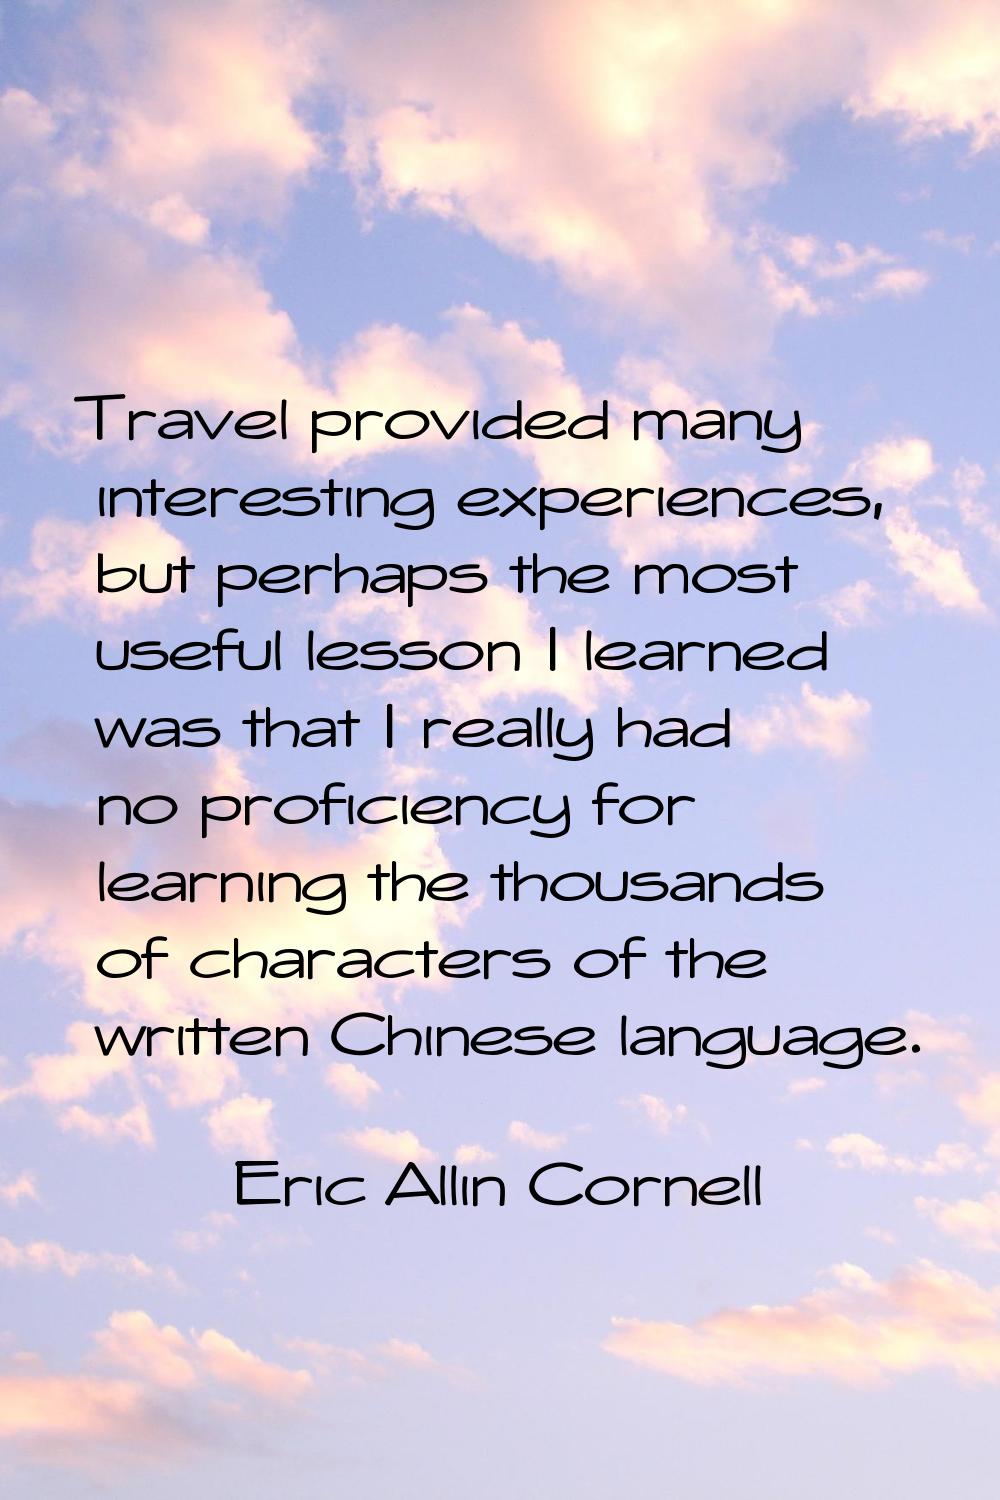 Travel provided many interesting experiences, but perhaps the most useful lesson I learned was that